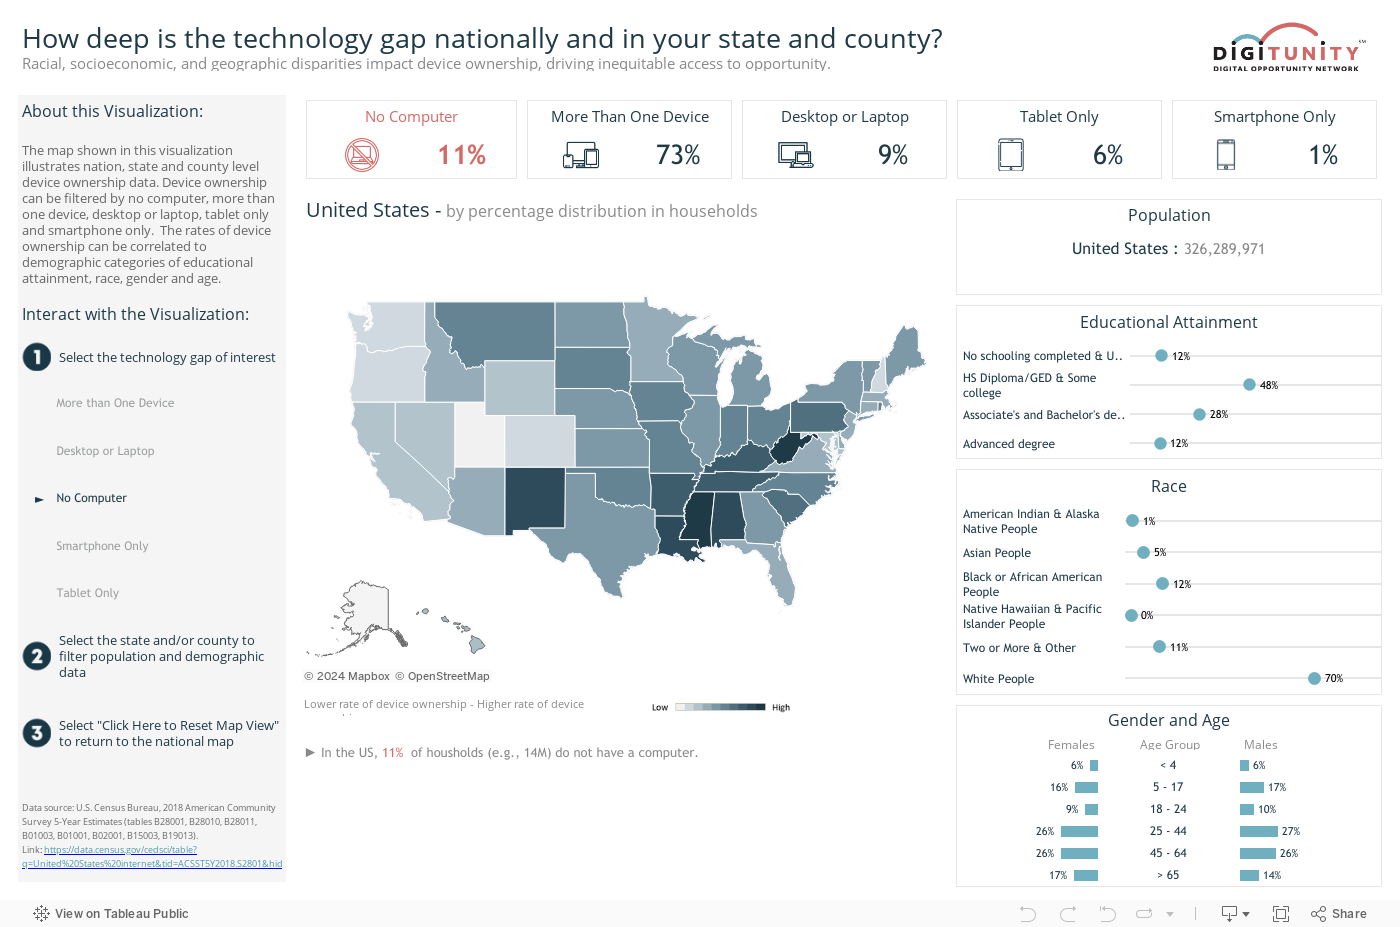 How deep is the technology gap in our nation and your state and county? 